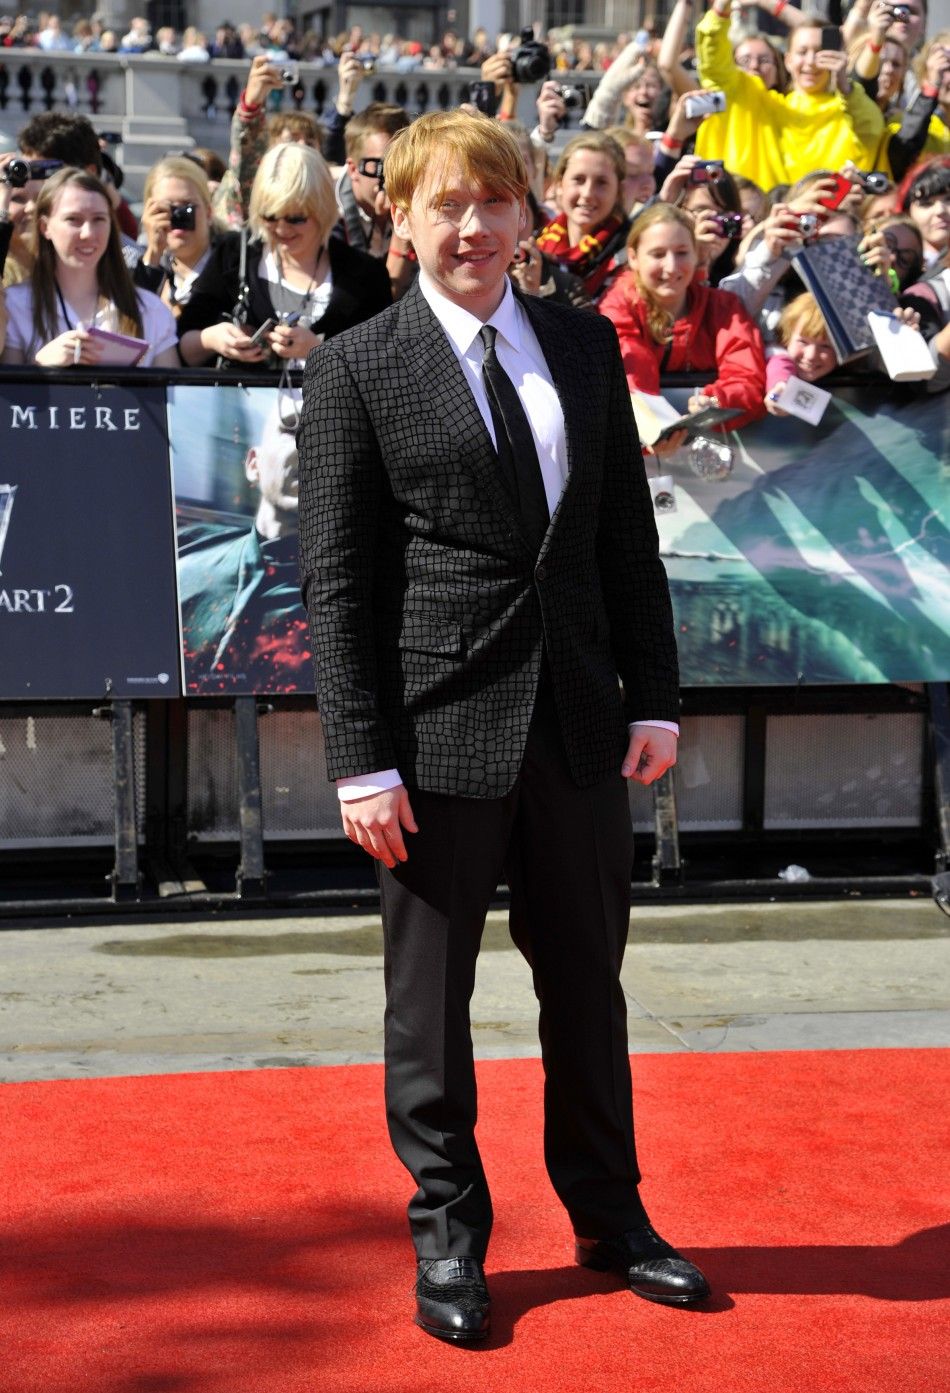 Actor Grint poses for pictures in front of fans as he arrives for the world premiere of quotHarry Potter and the Deathly Hallows - Part 2quot in Trafalgar Square, in central London